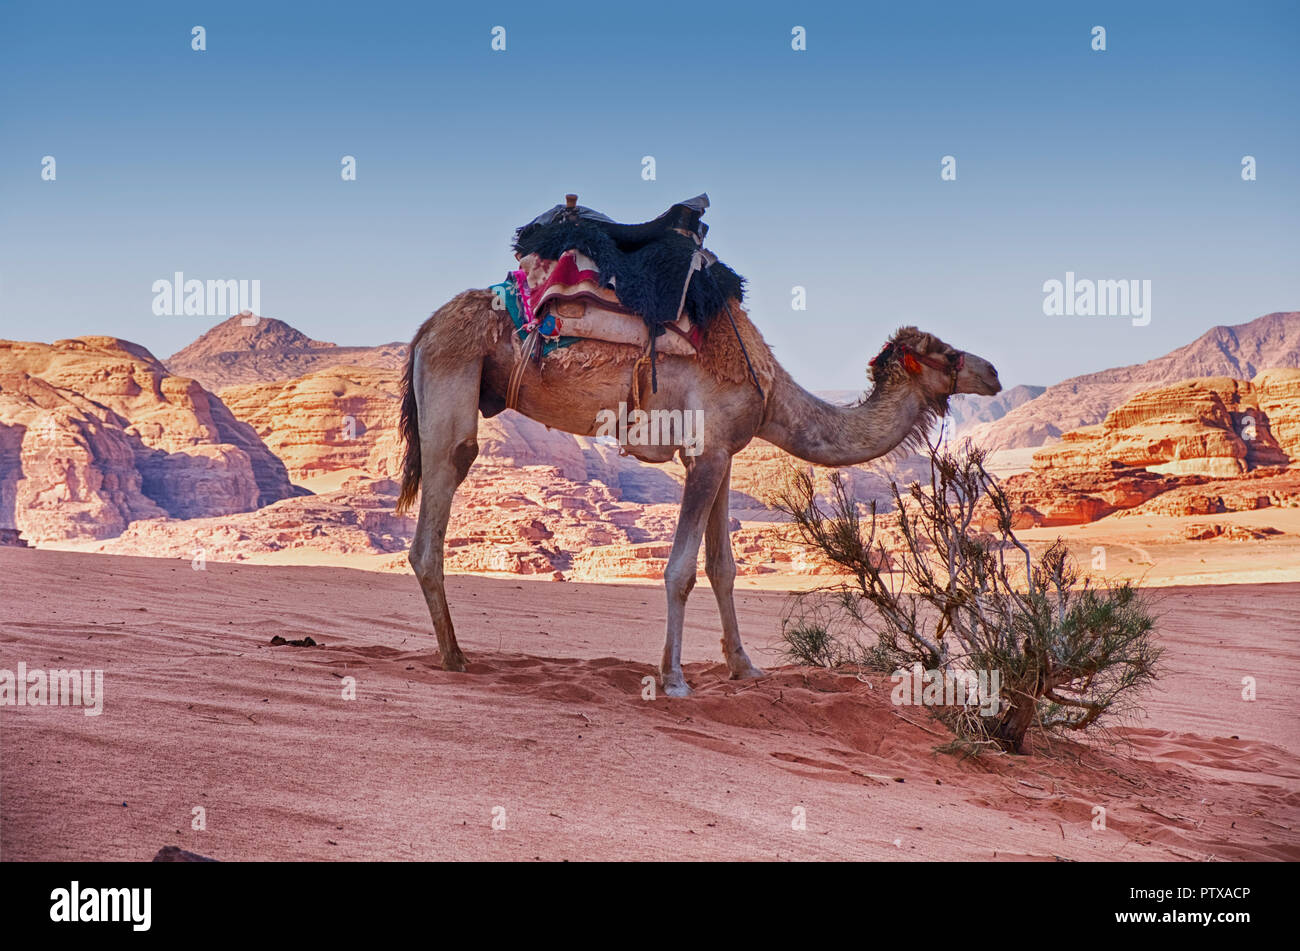 One camel waits near an isolated bush amidst the sand and mountains of the Wadi Rum desert in Southern Jordan. Stock Photo